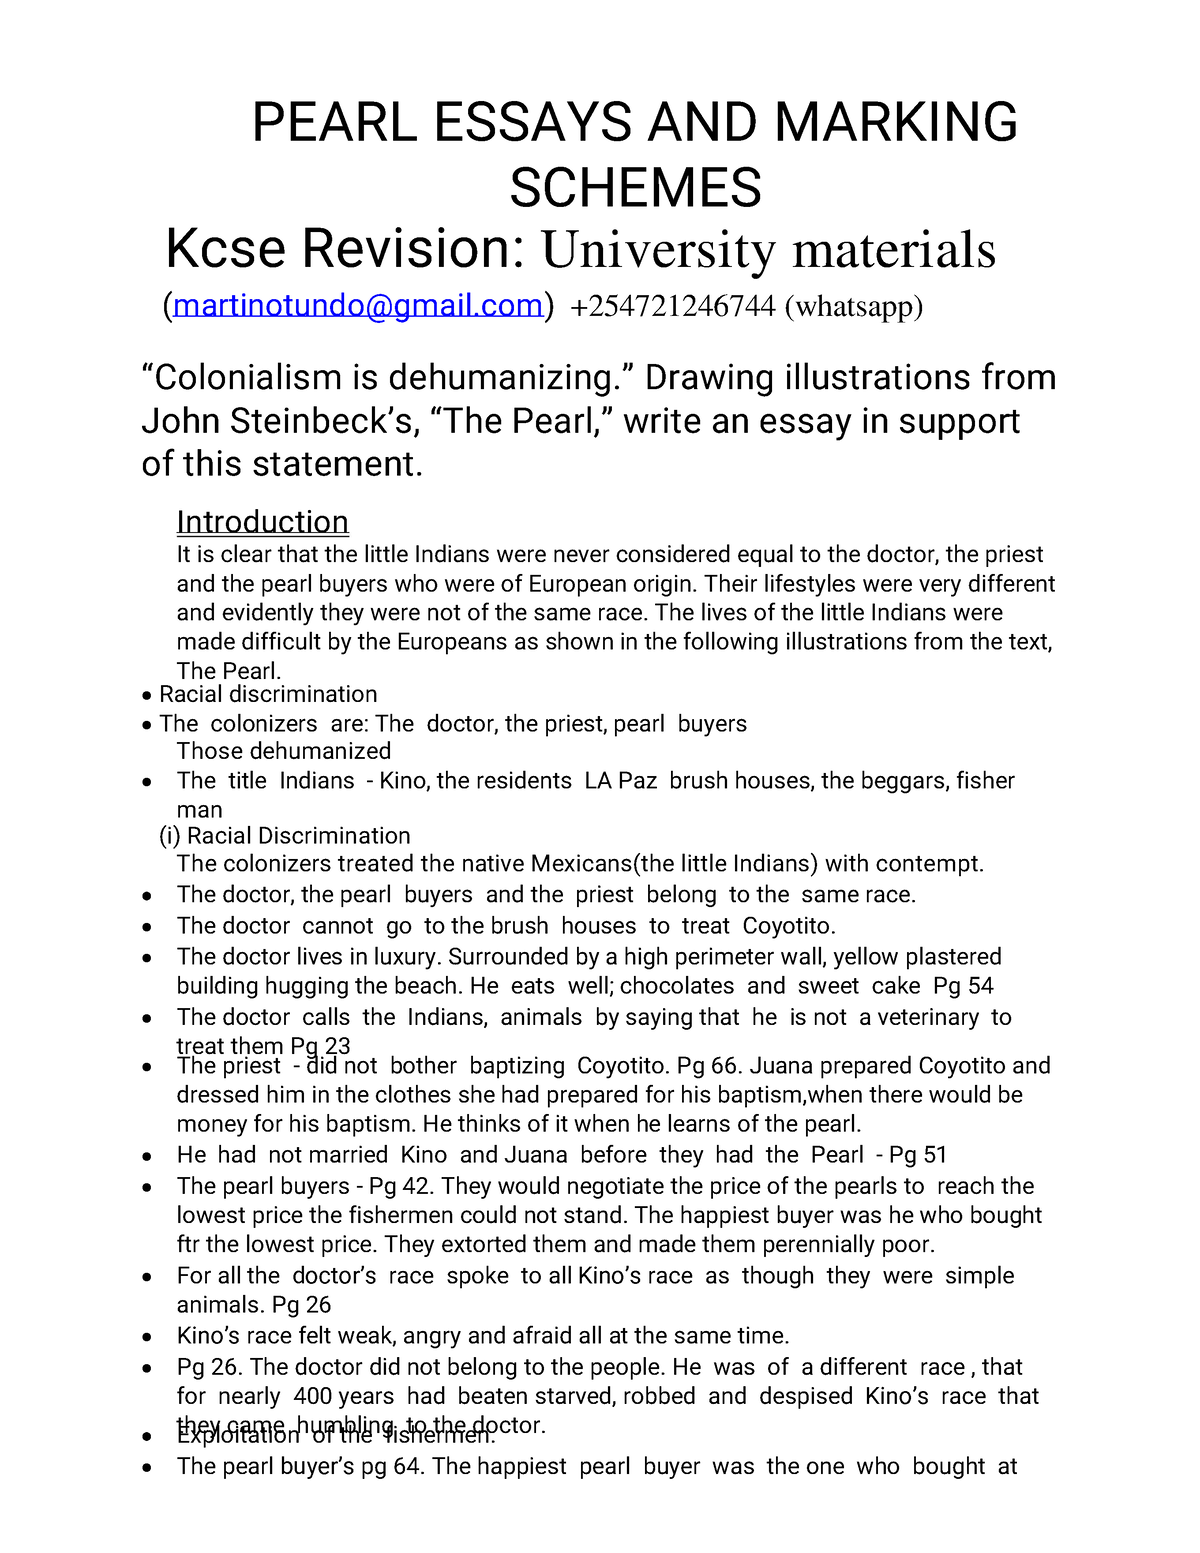 kcse pearl essay questions and answers